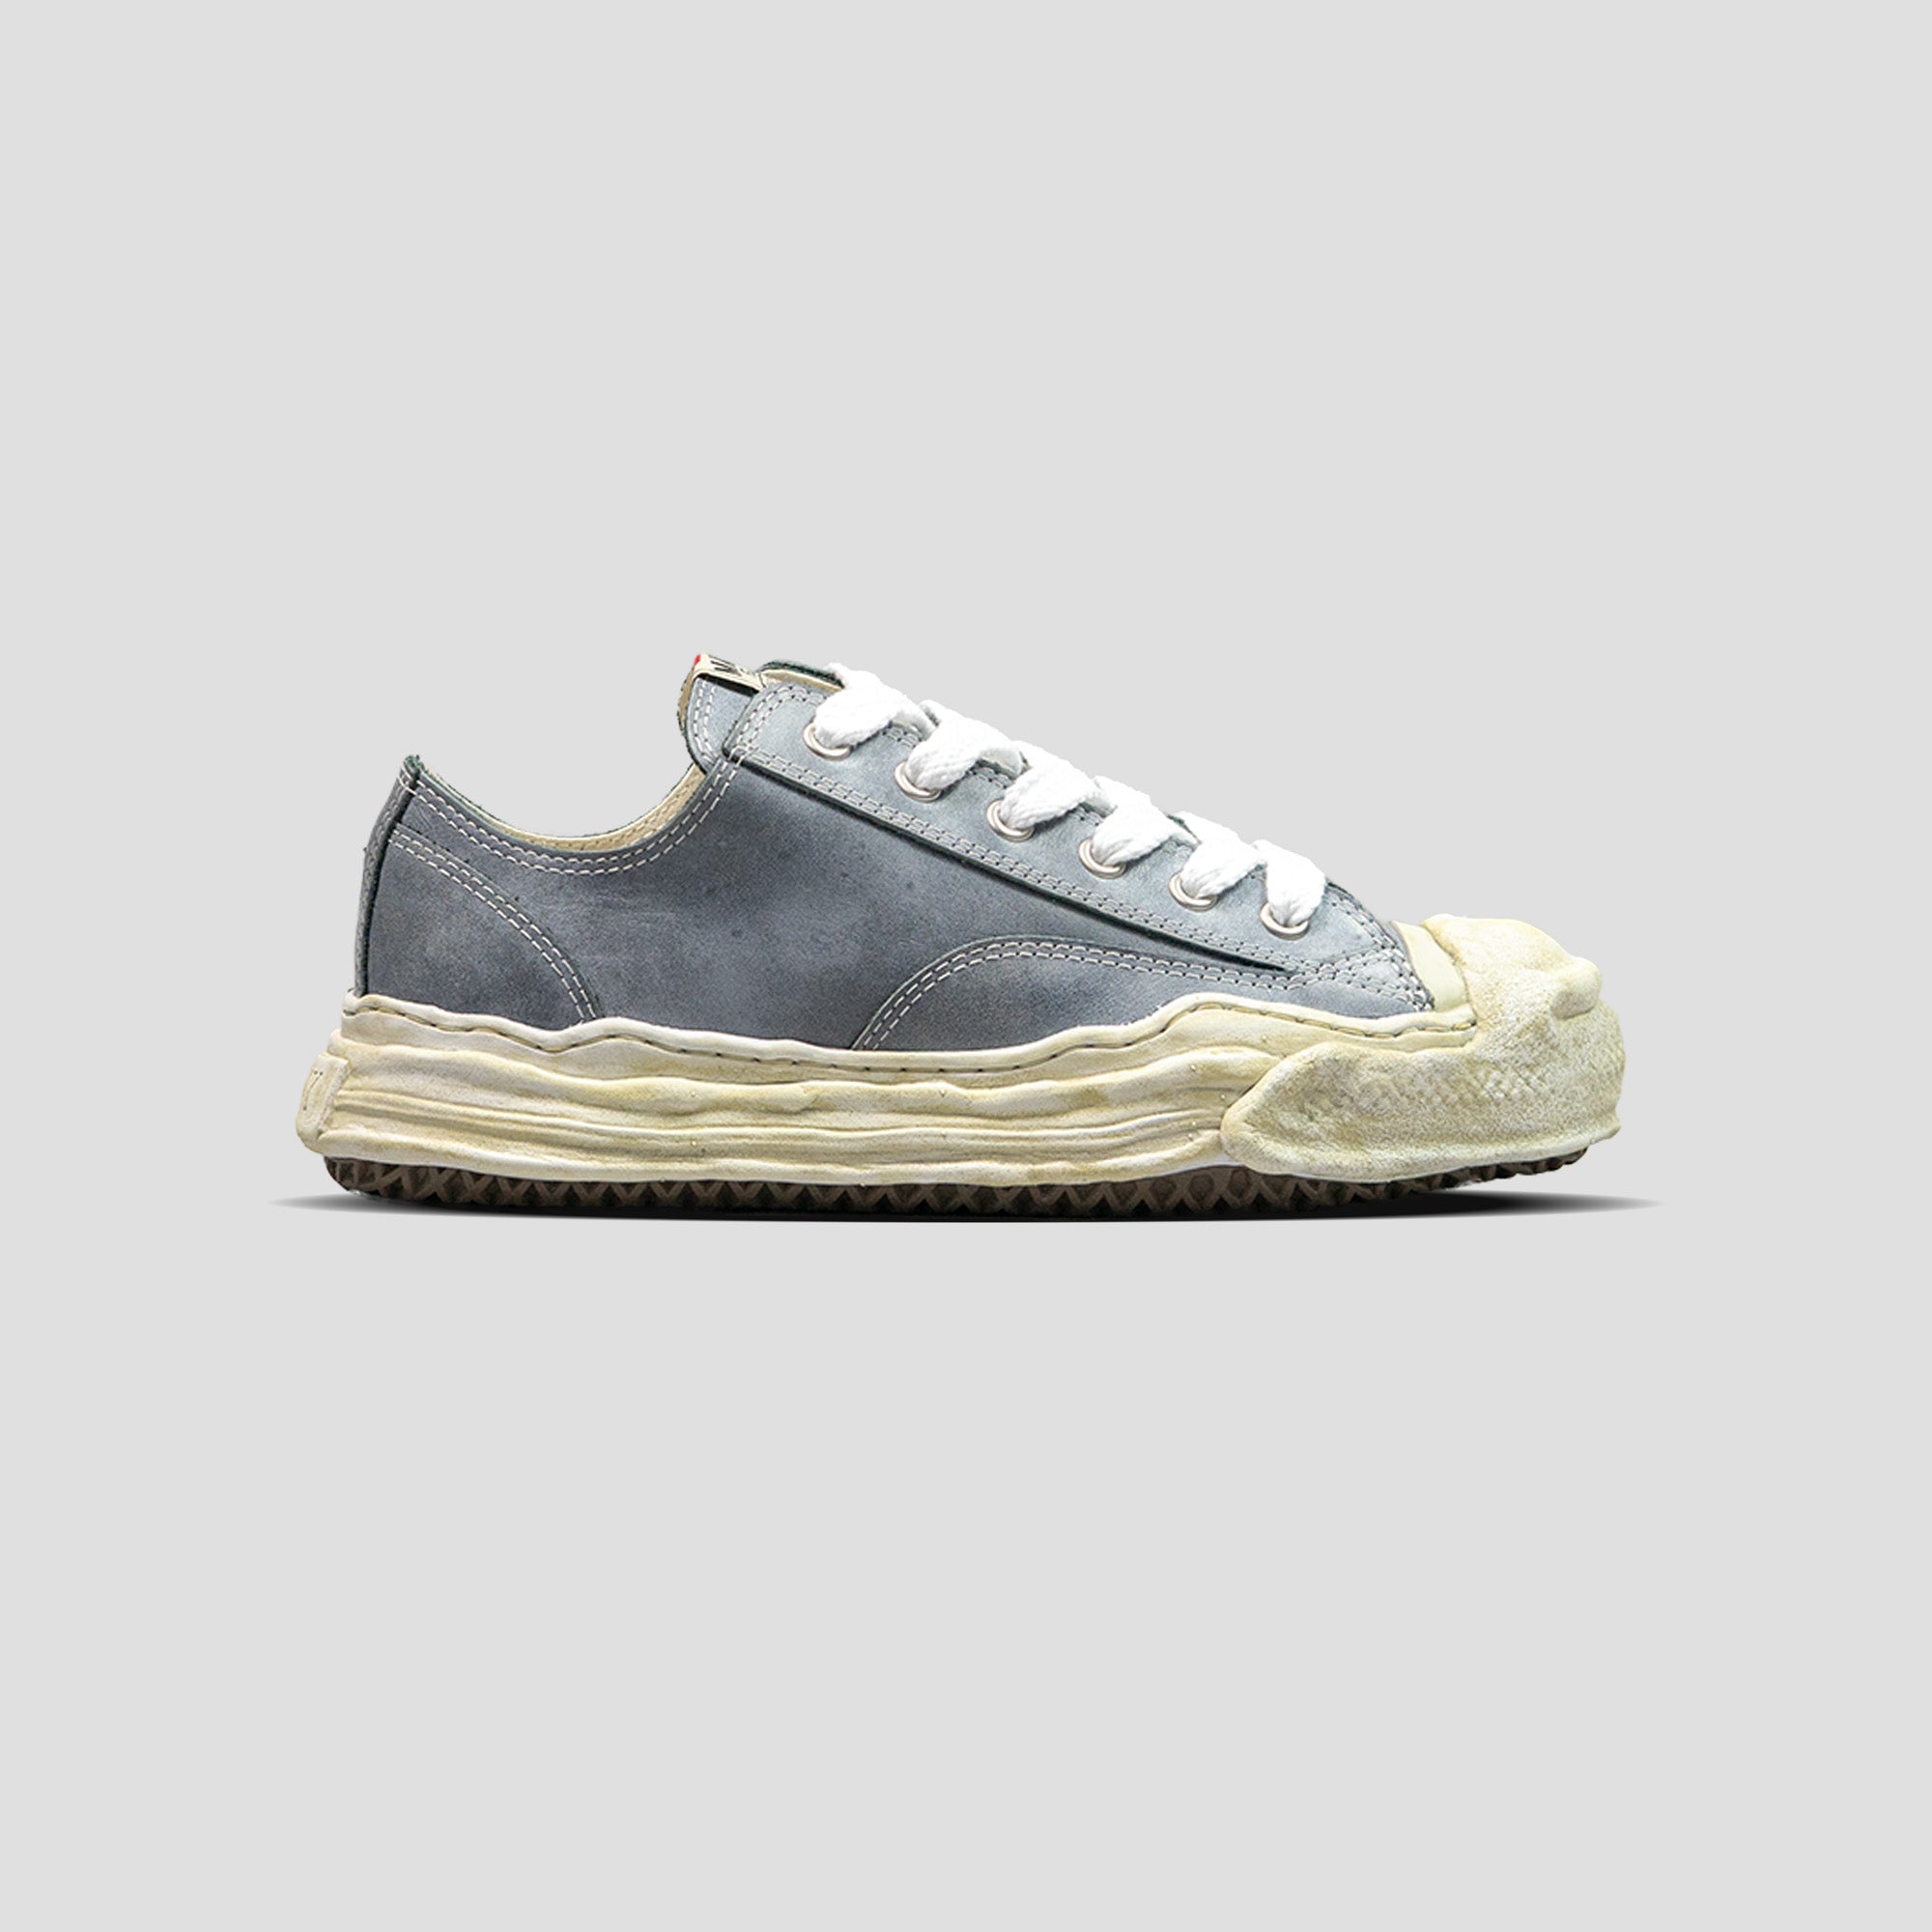 HANK OG SOLE LOW-TOP VINTAGE TREATMENT LEATHER SNEAKERS